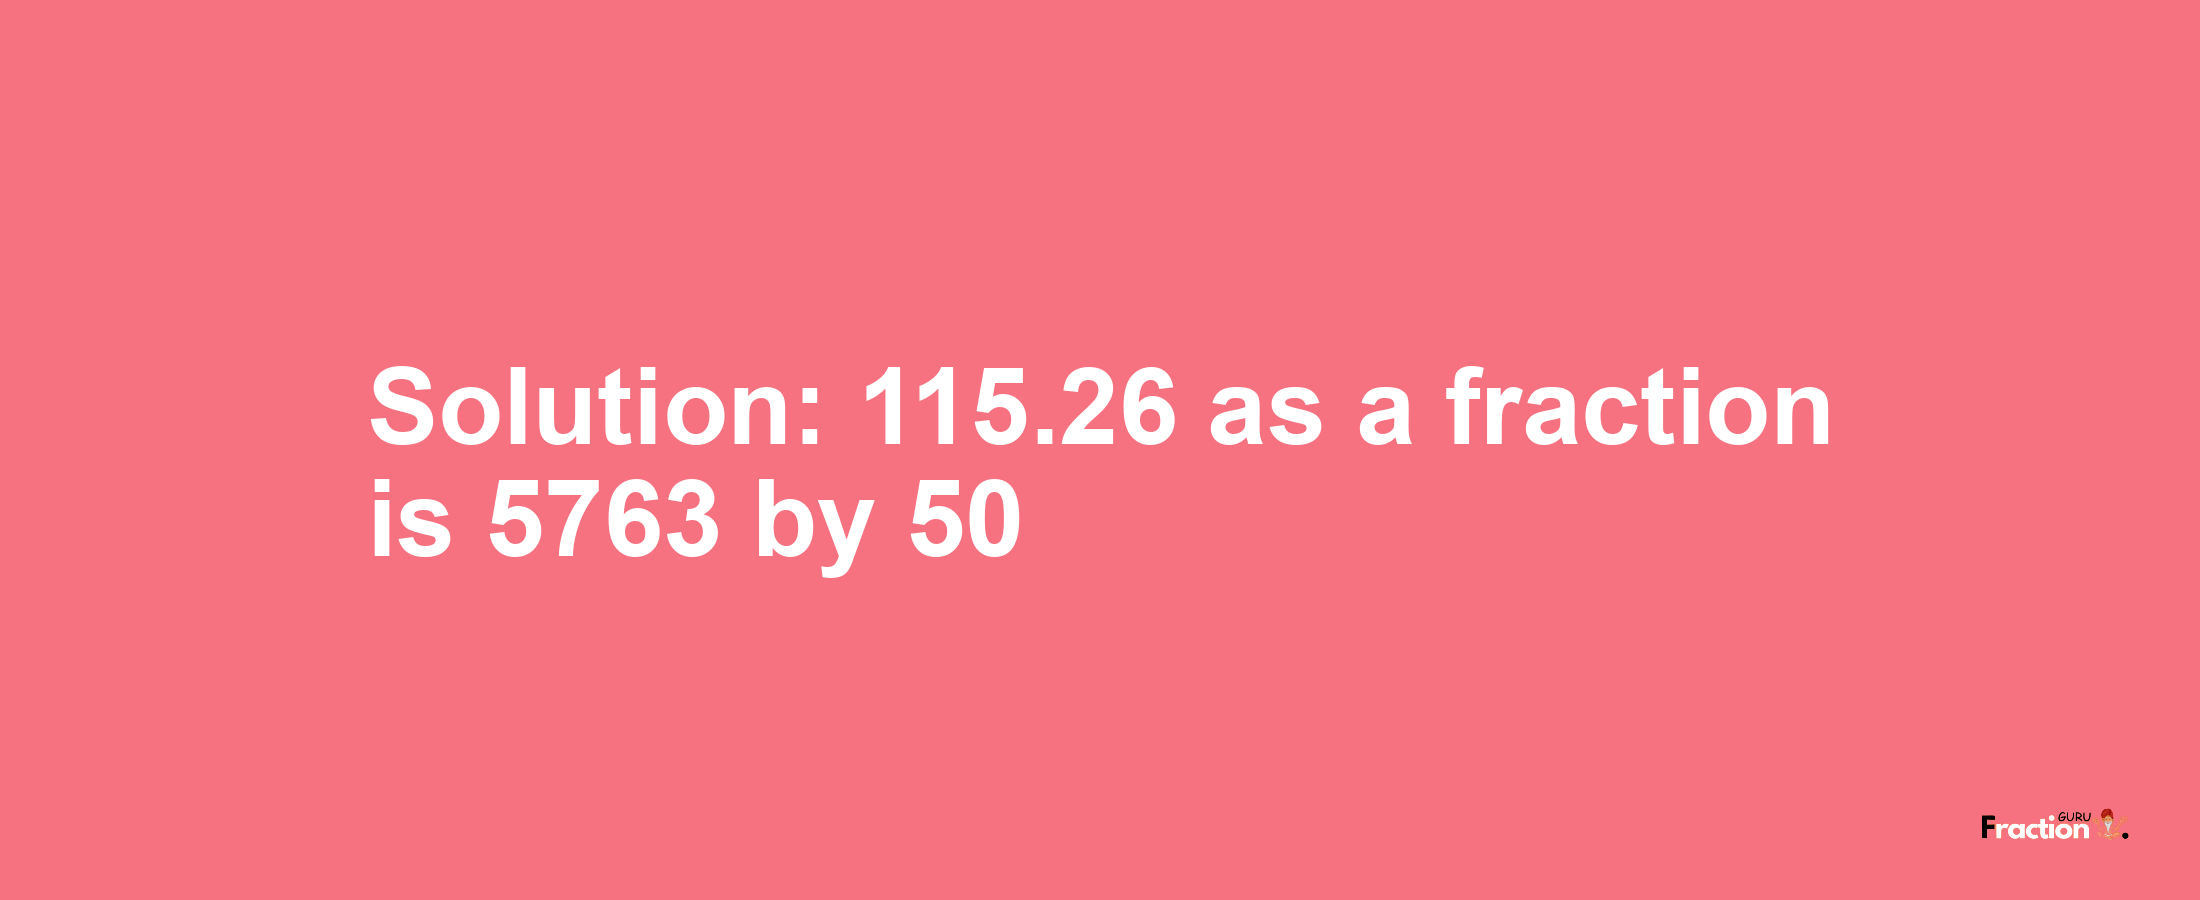 Solution:115.26 as a fraction is 5763/50